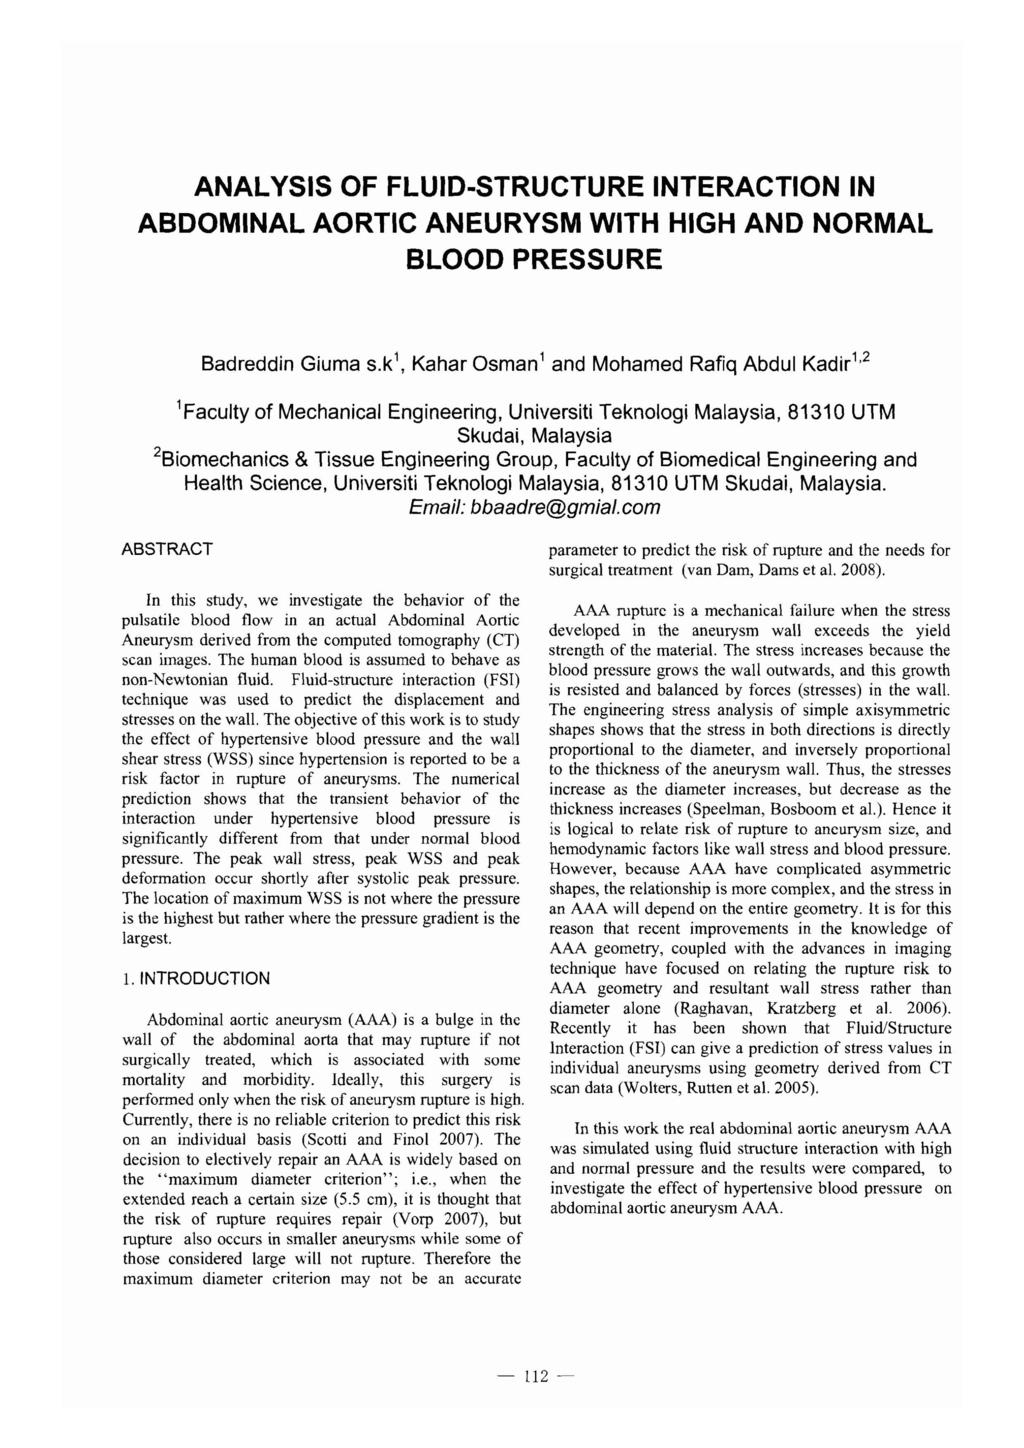 ANALYSIS OF FLUID-STRUCTURE INTERACTION IN ABDOMINAL AORTIC ANEURYSM WITH HIGH AND NORMAL BLOOD PRESSURE Badreddin Giuma s.